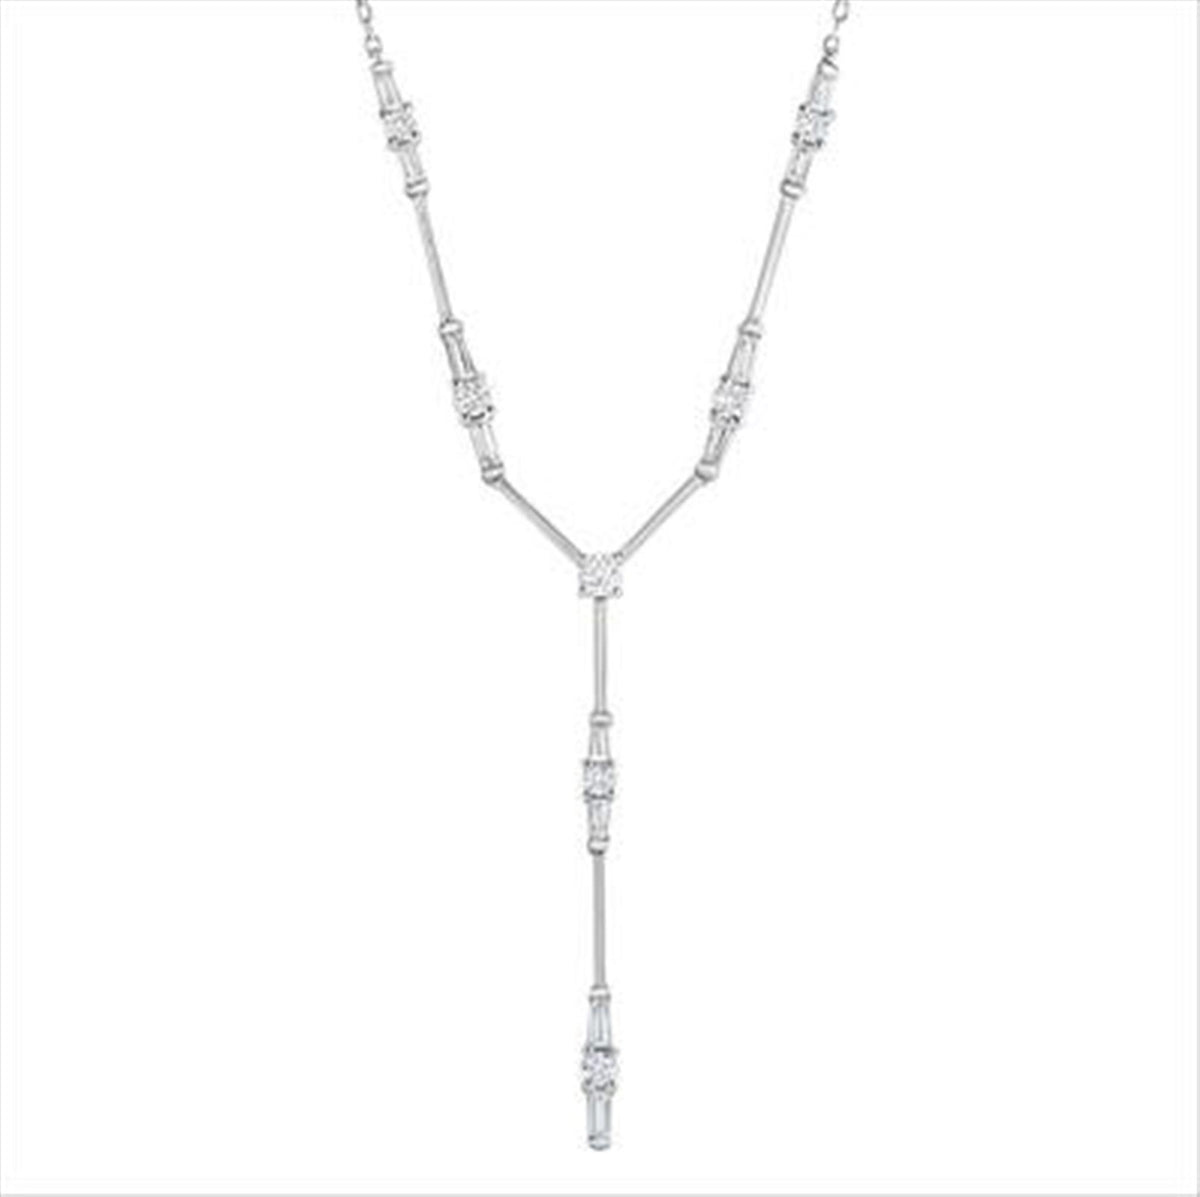 18Kt White Gold Y Necklace with Alternating Baguette and Round Stations on an 16-18" Adjustable Chain